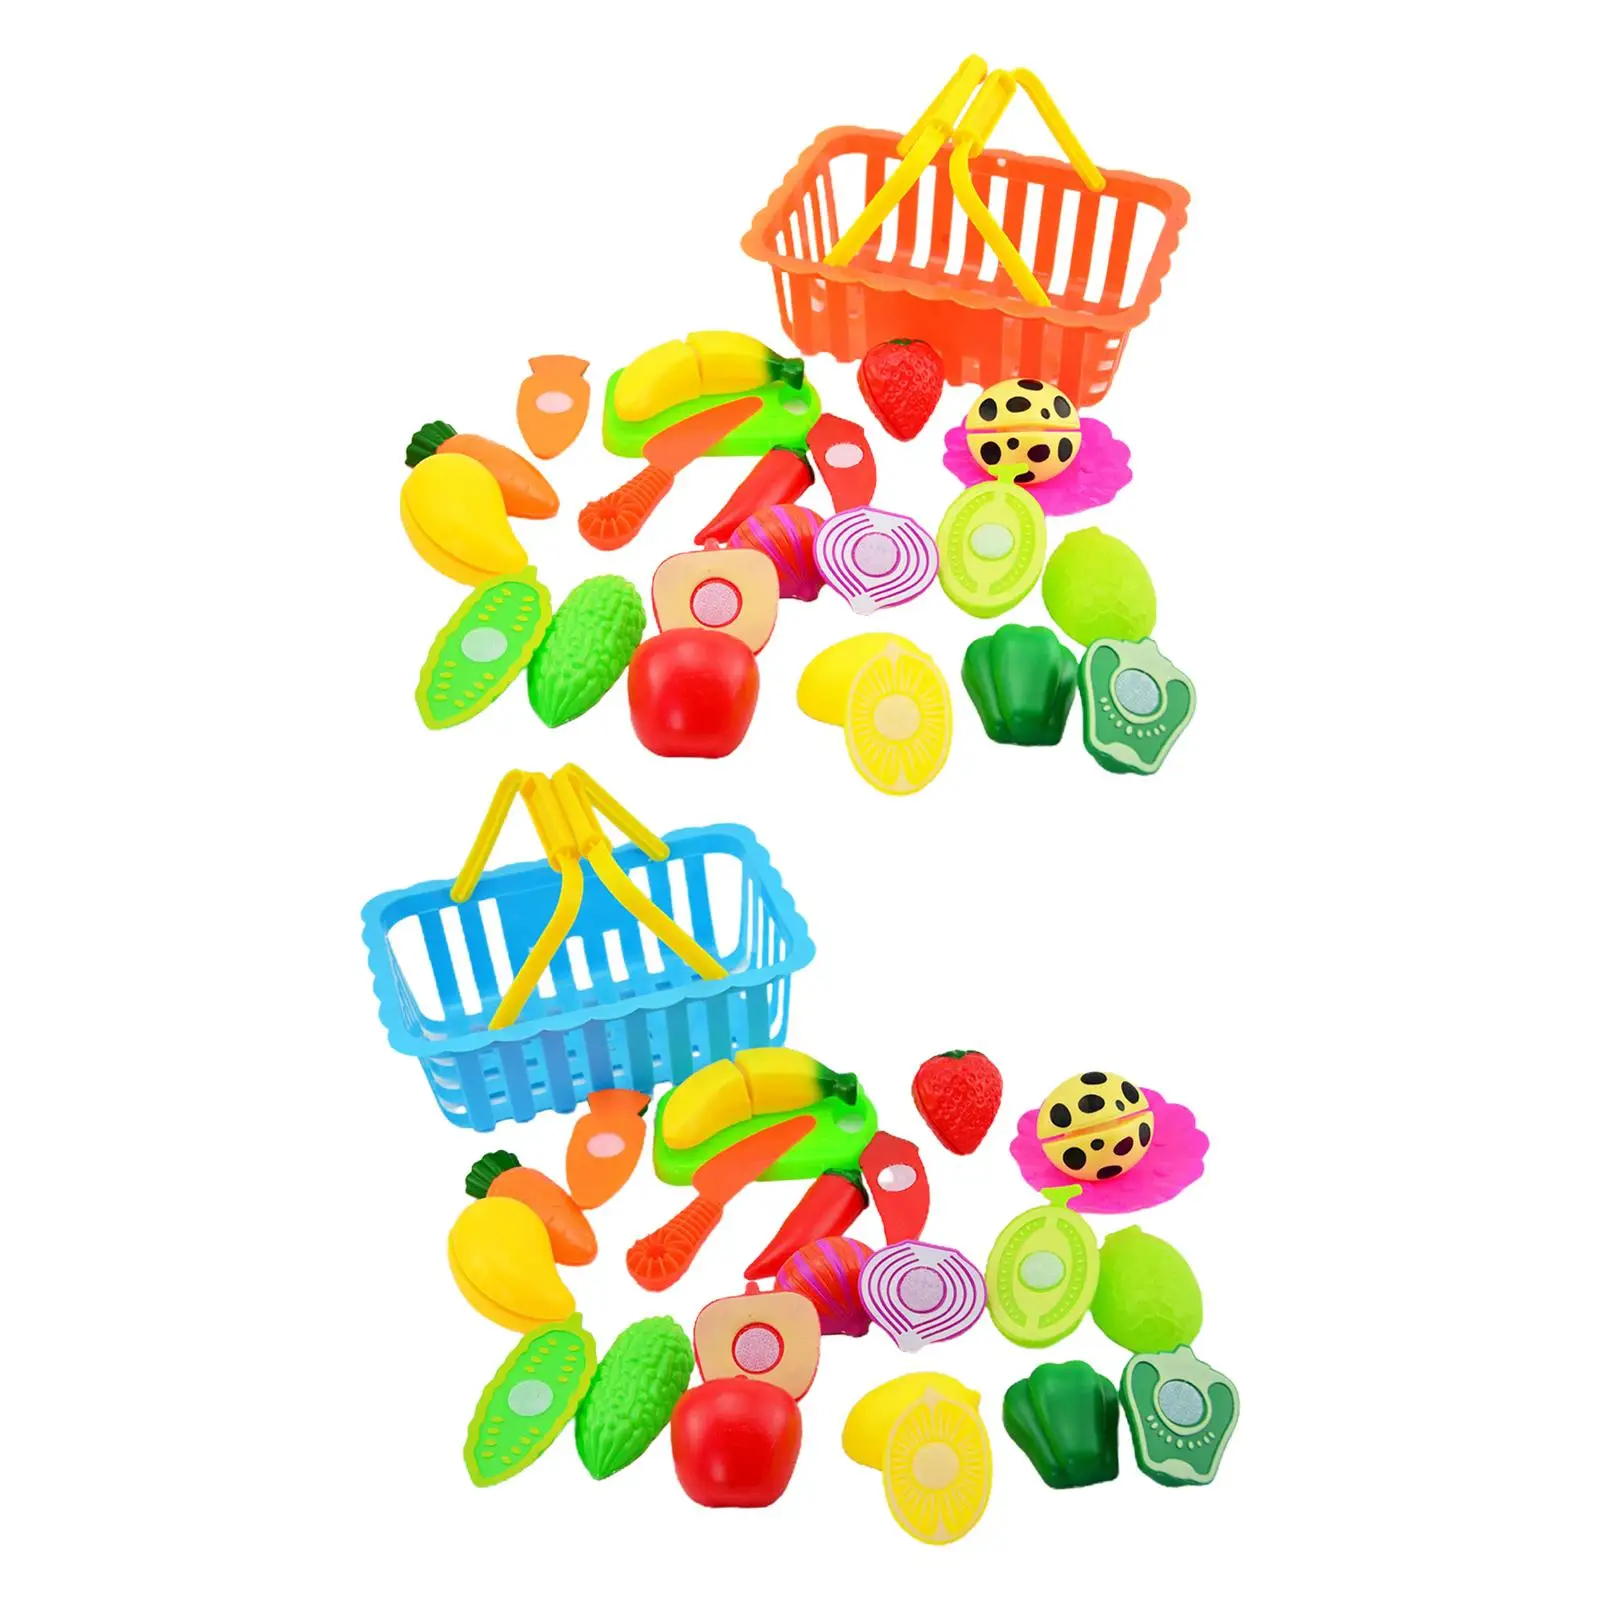 16Pcs Pretend Play Toys Set Plastic Fruits Vegetable Early Educational Game Cutting Fake Food for Over 3 Years Old Toddlers Kids